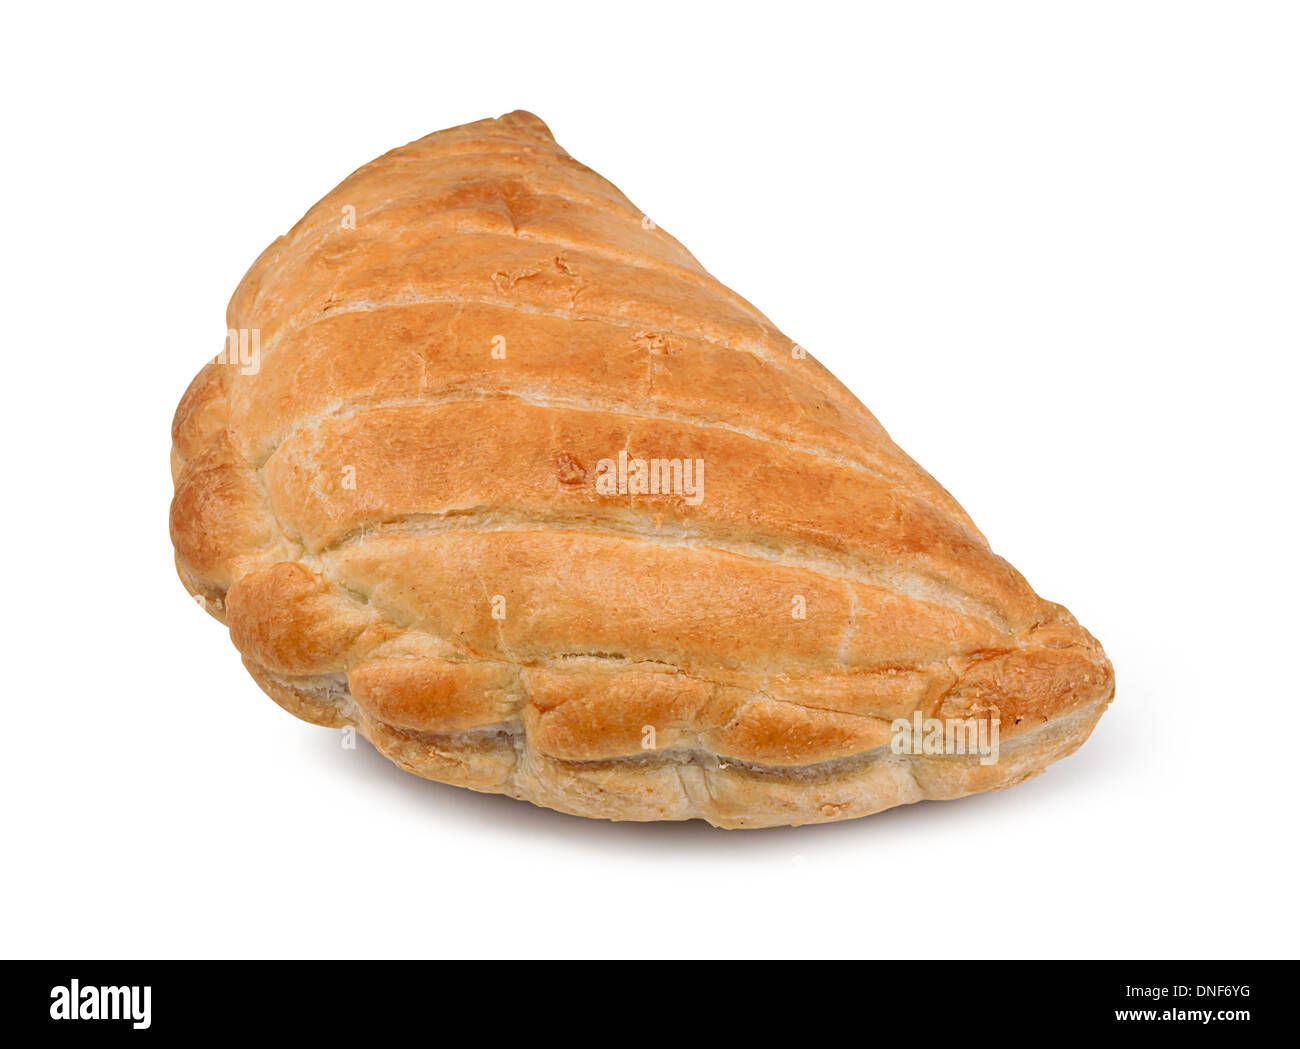 A Single Cornish Pasty isolated against a white background Stock Photo